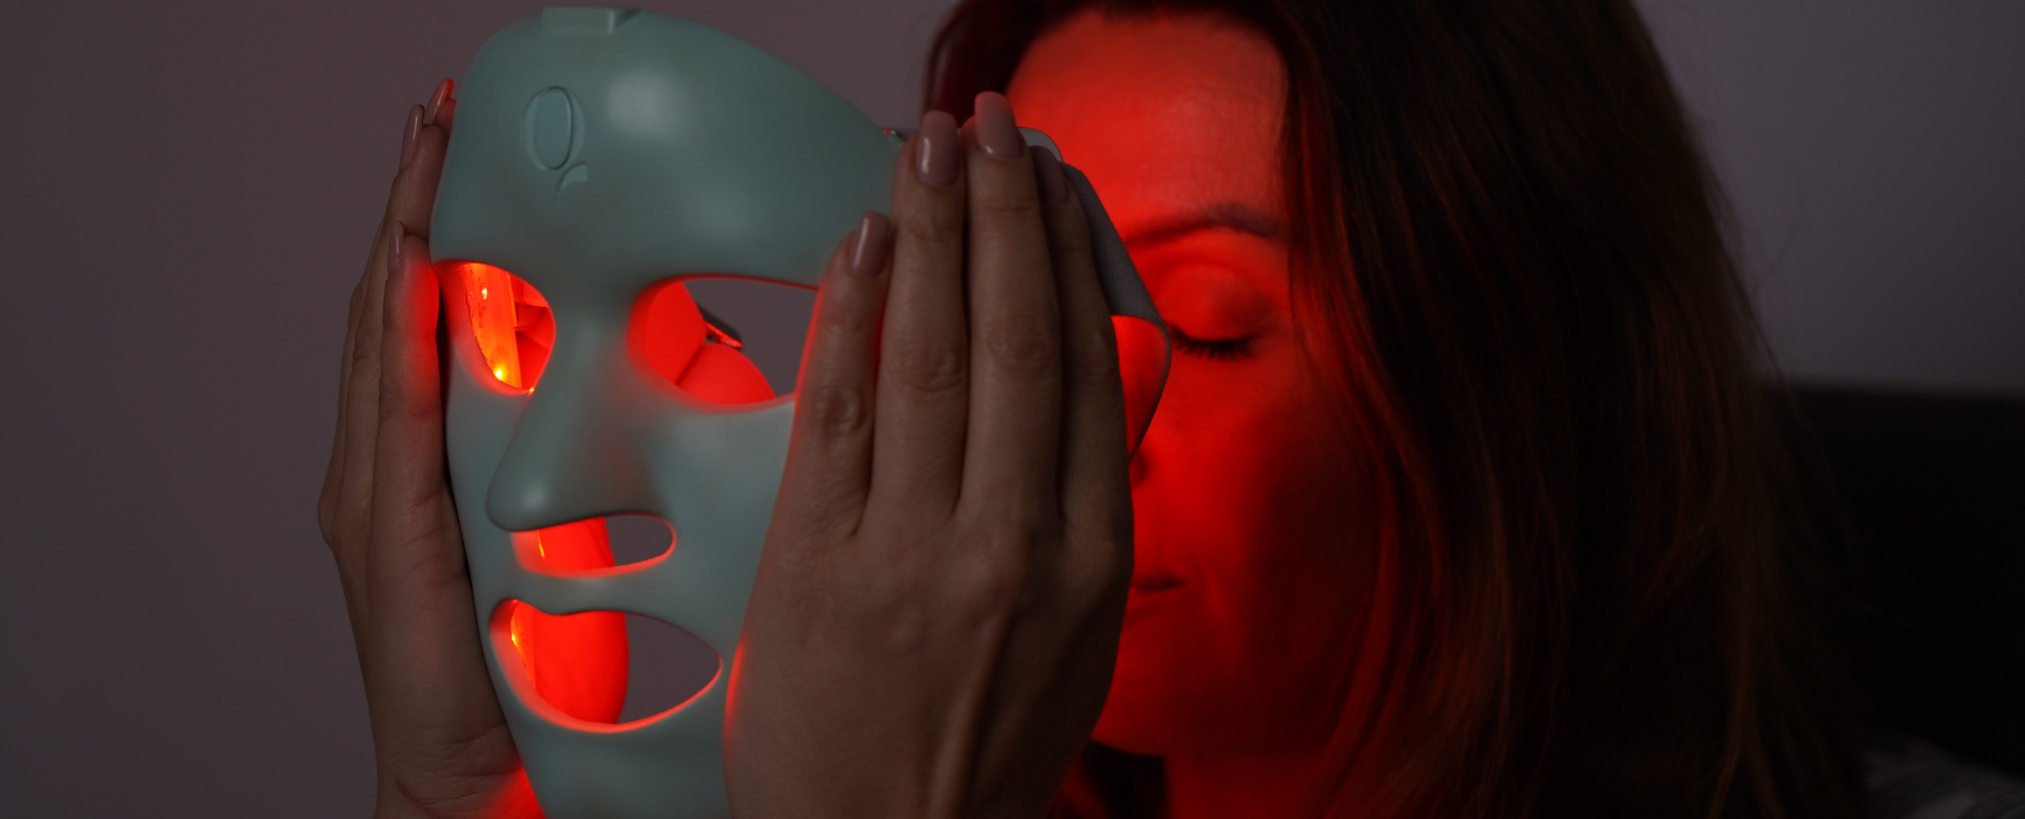 Red Light Therapy Skin Health Benefits, Skin Rejuvenation, Collagen, and Anti-Aging